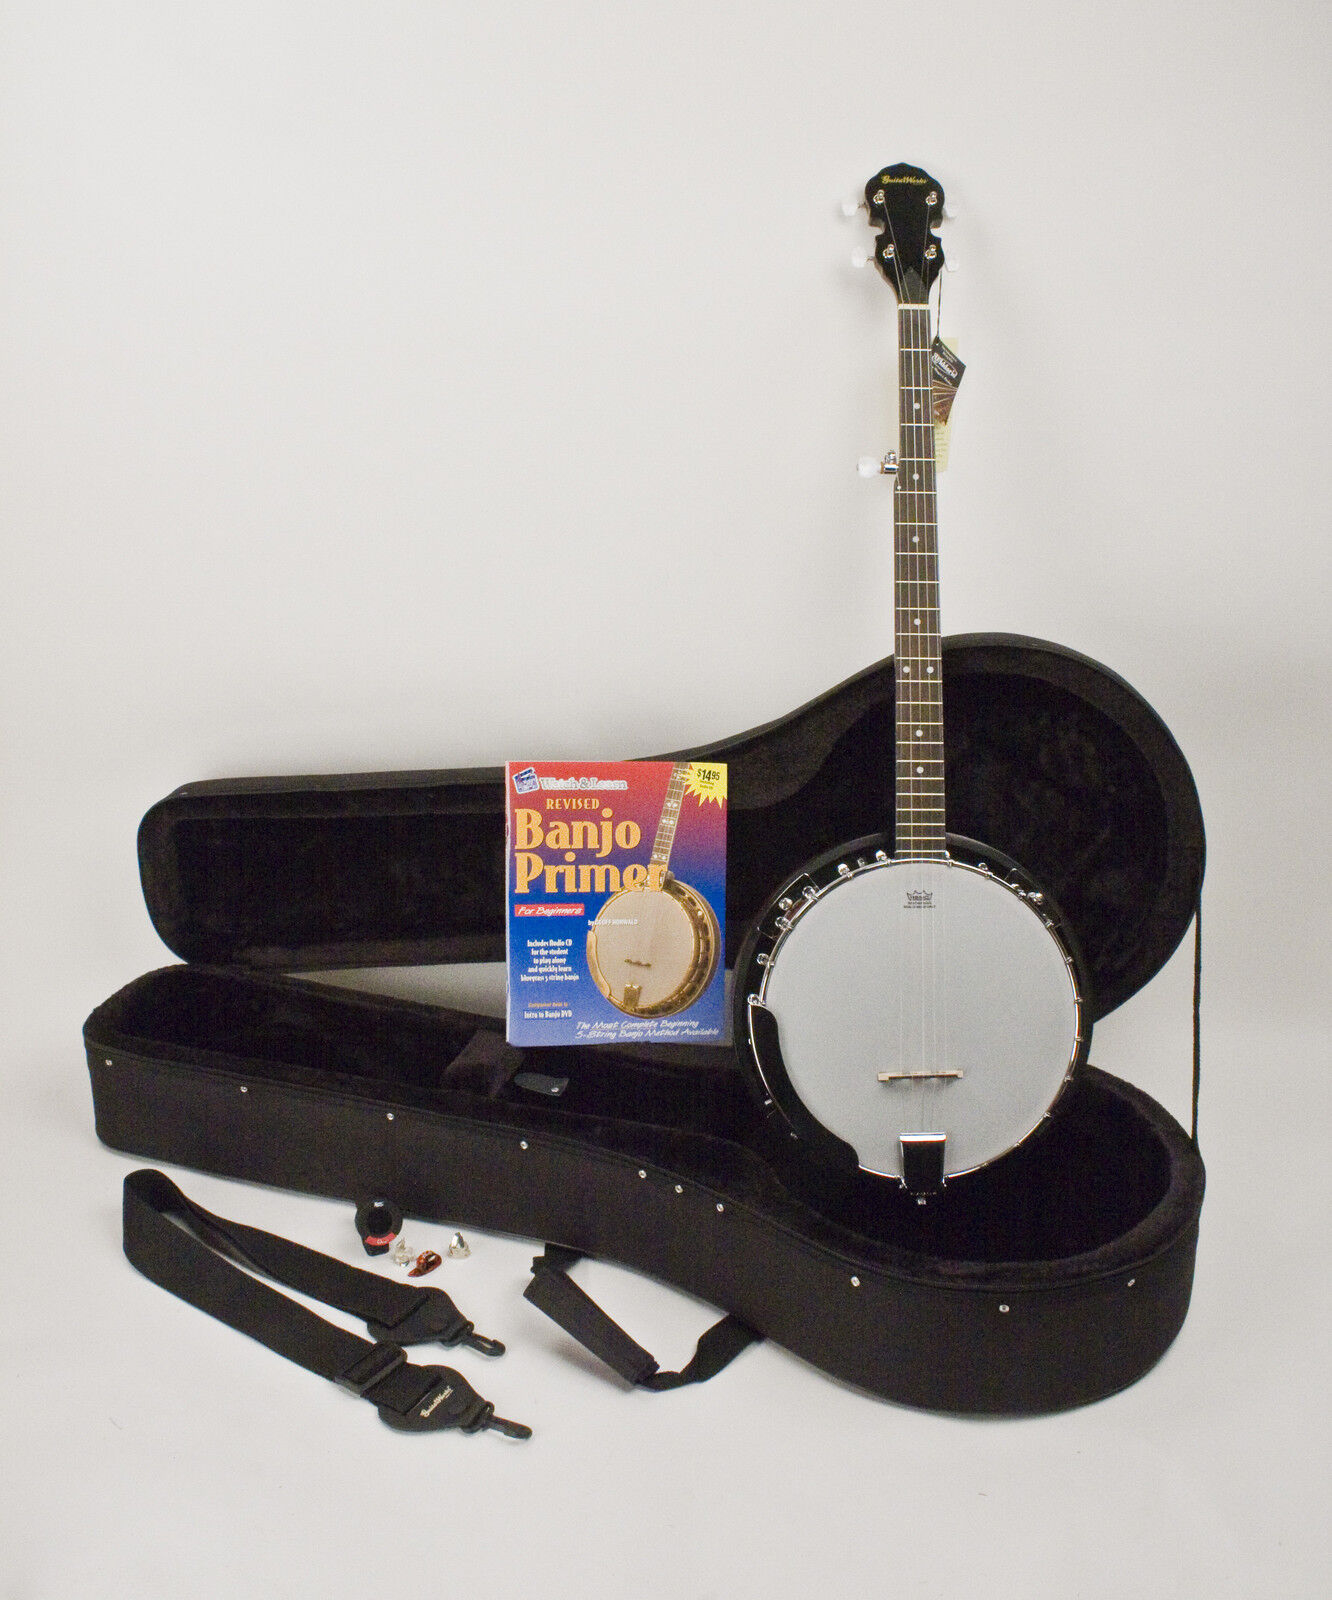 5-STRING BANJO PACKAGE OUR #1 SELLER 50% OFF SET-UP FOR EASY PLAY WITH HARD CASE